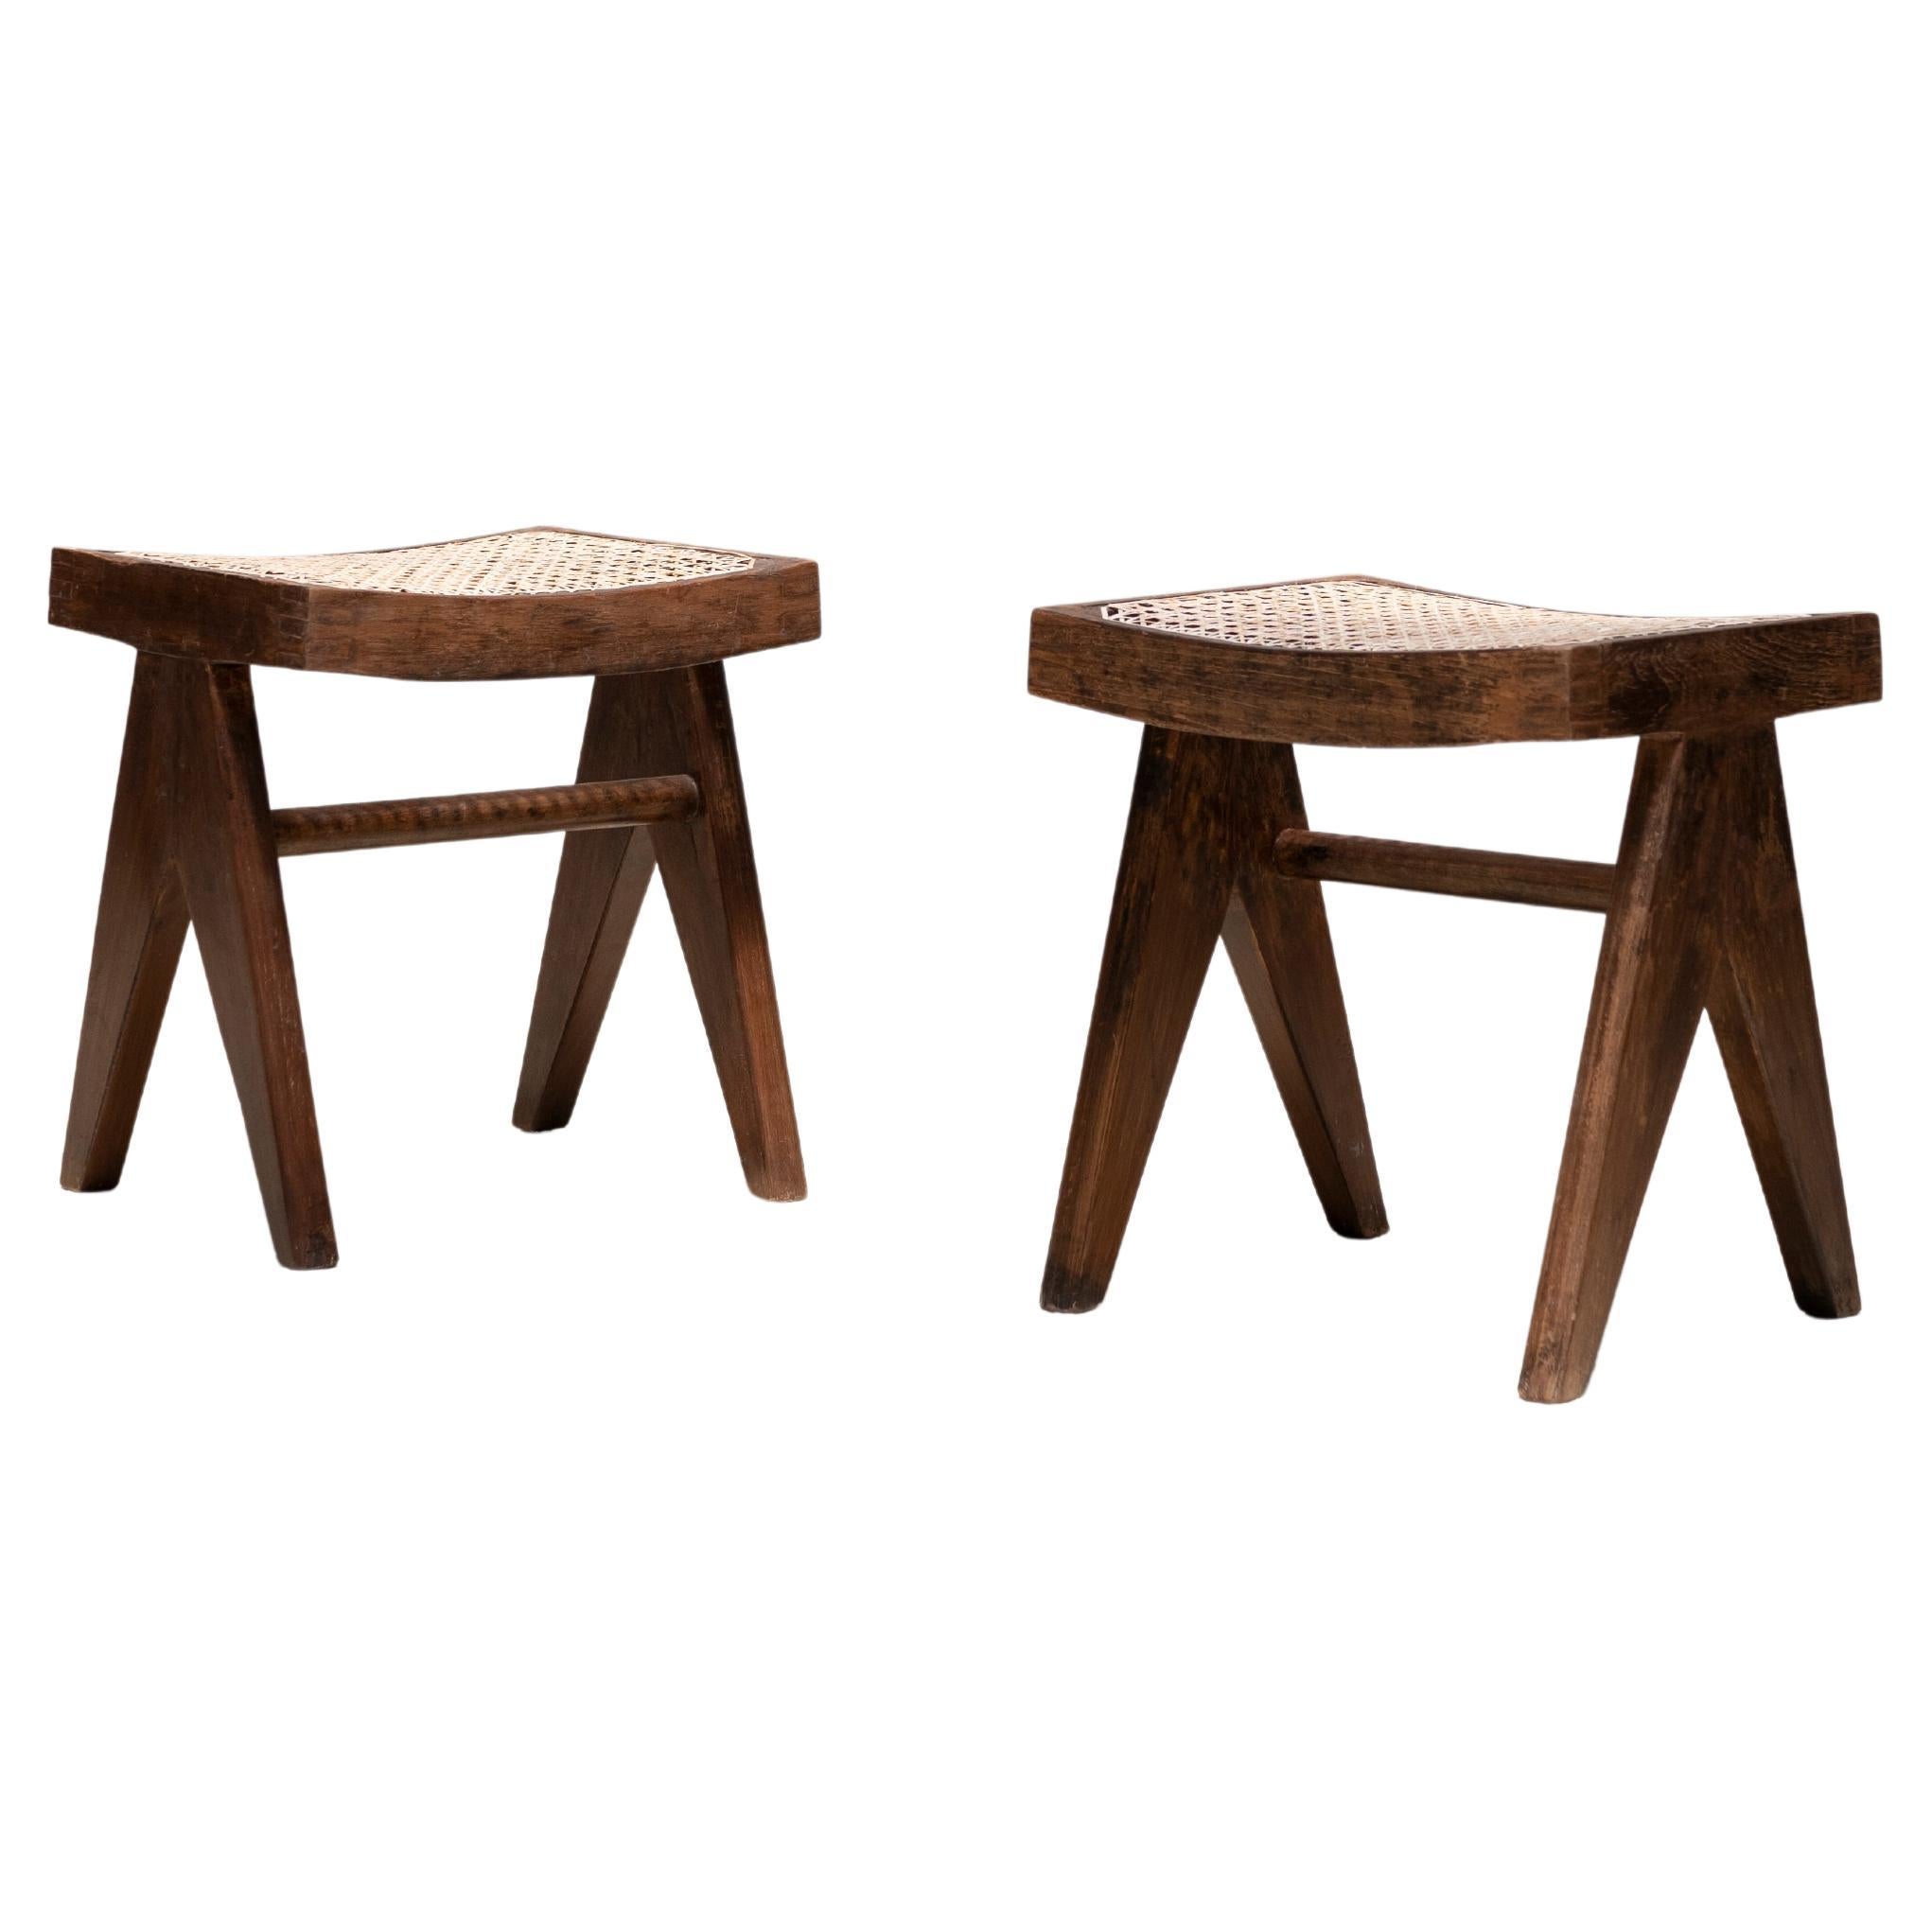 Pierre Jeanneret A-Legs Cane Low Stools, Post-Graduate Institute, Chandigarh For Sale